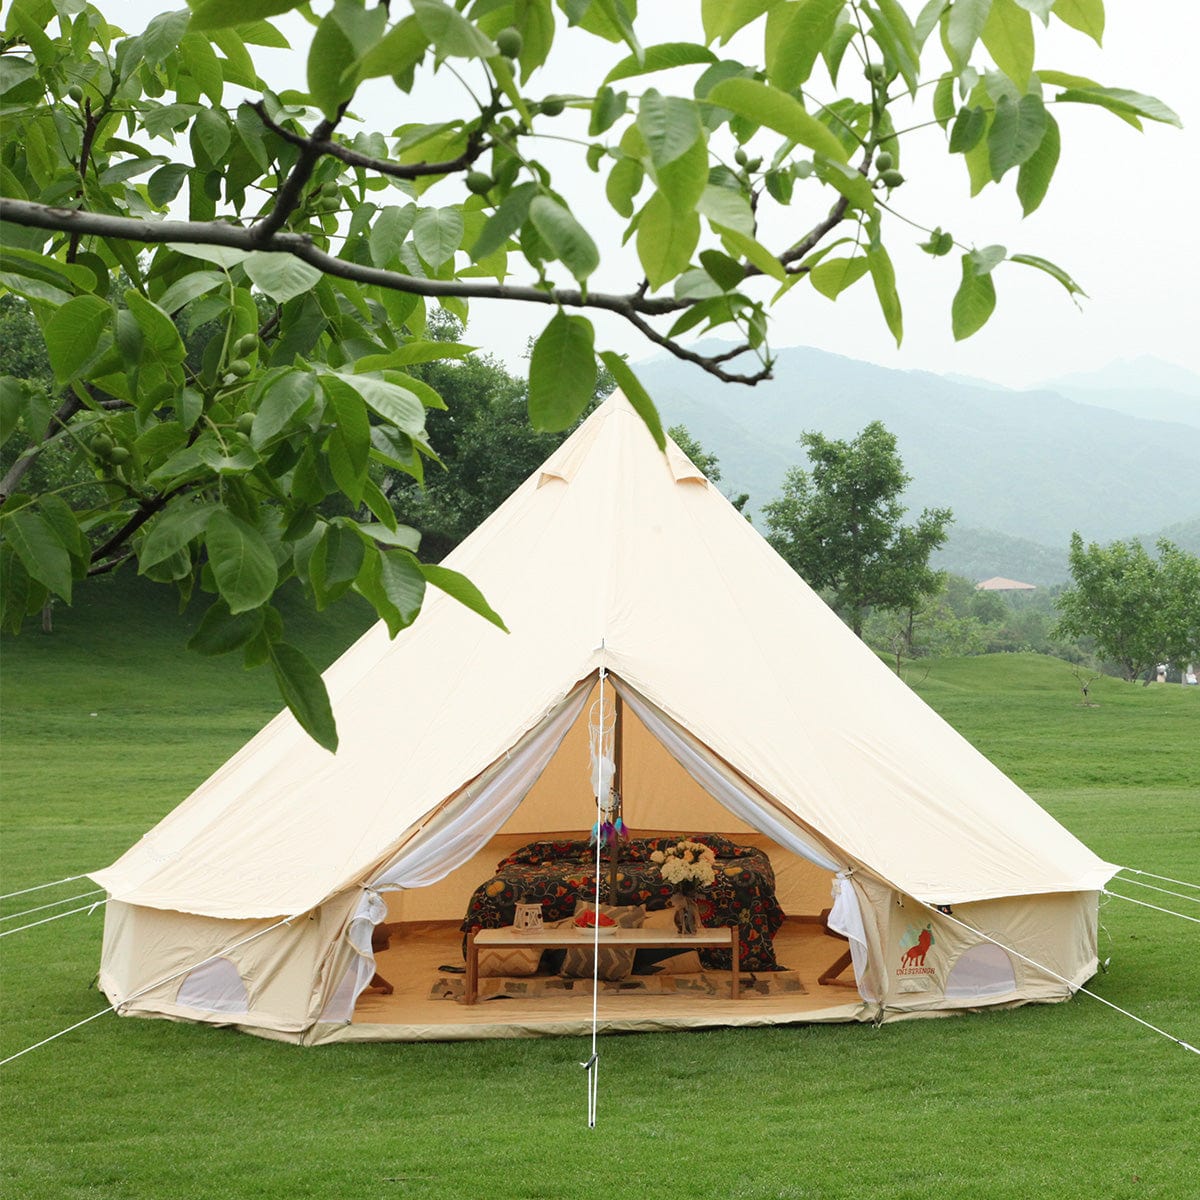 Comfortable Coast Bell Tents 5m Canvas Bell Tent Luna Canvas Bell Tents 4m/5m/6m- LCBT456m